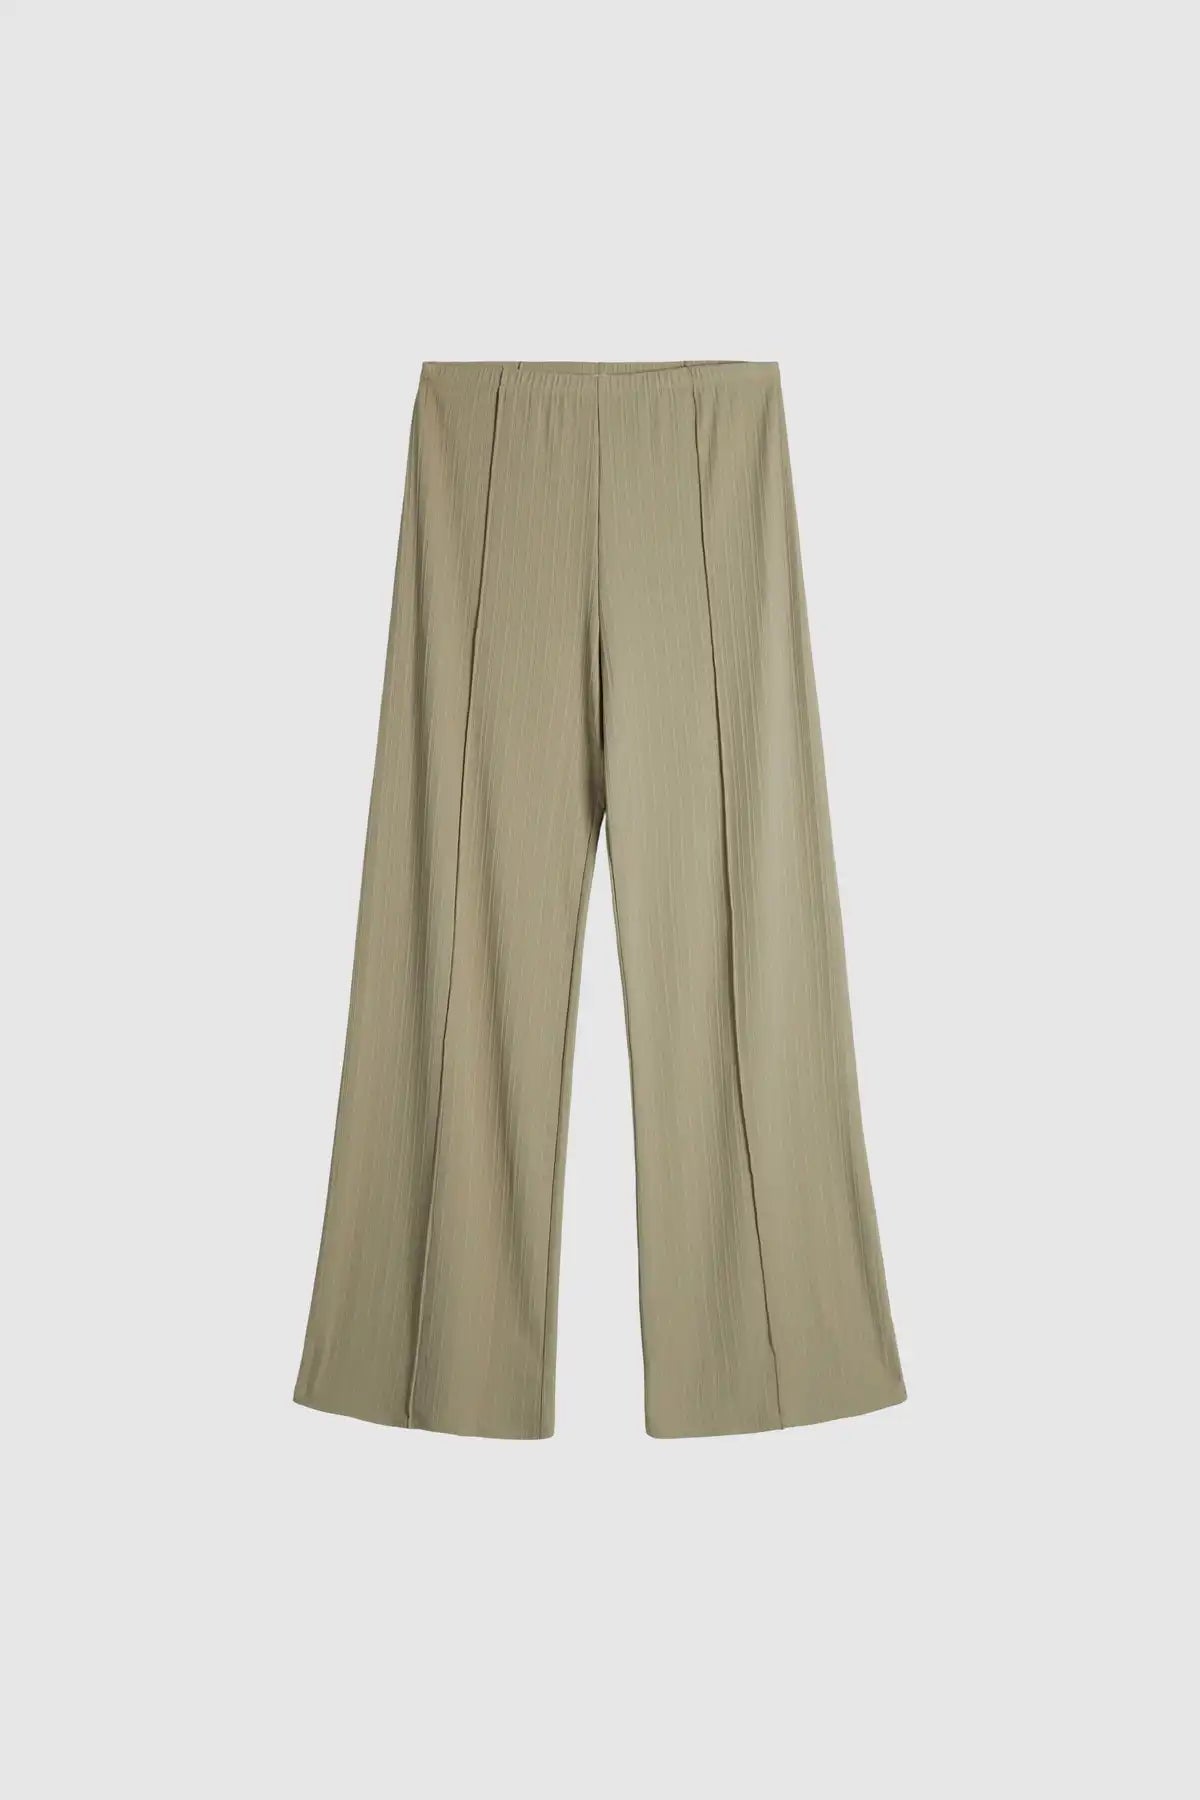 Flared Pants with Stitch Details